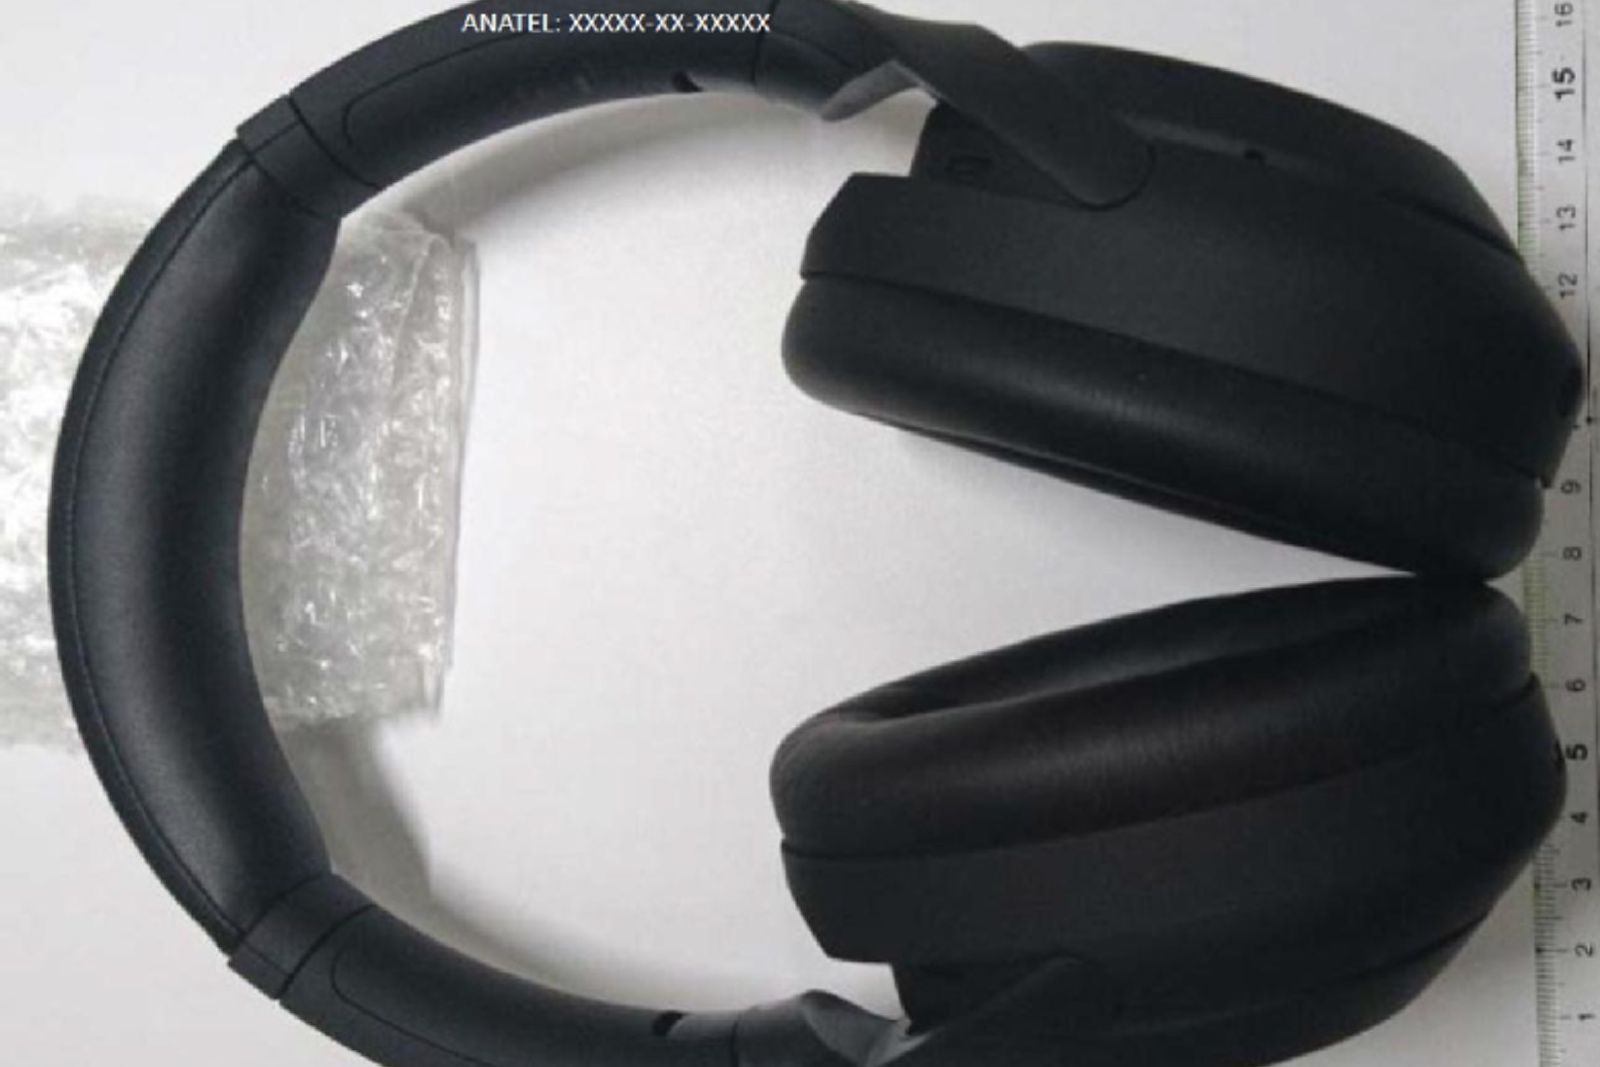 Sonys new noise-cancelling Sony WH-1000XM4 headphones get photographed image 1